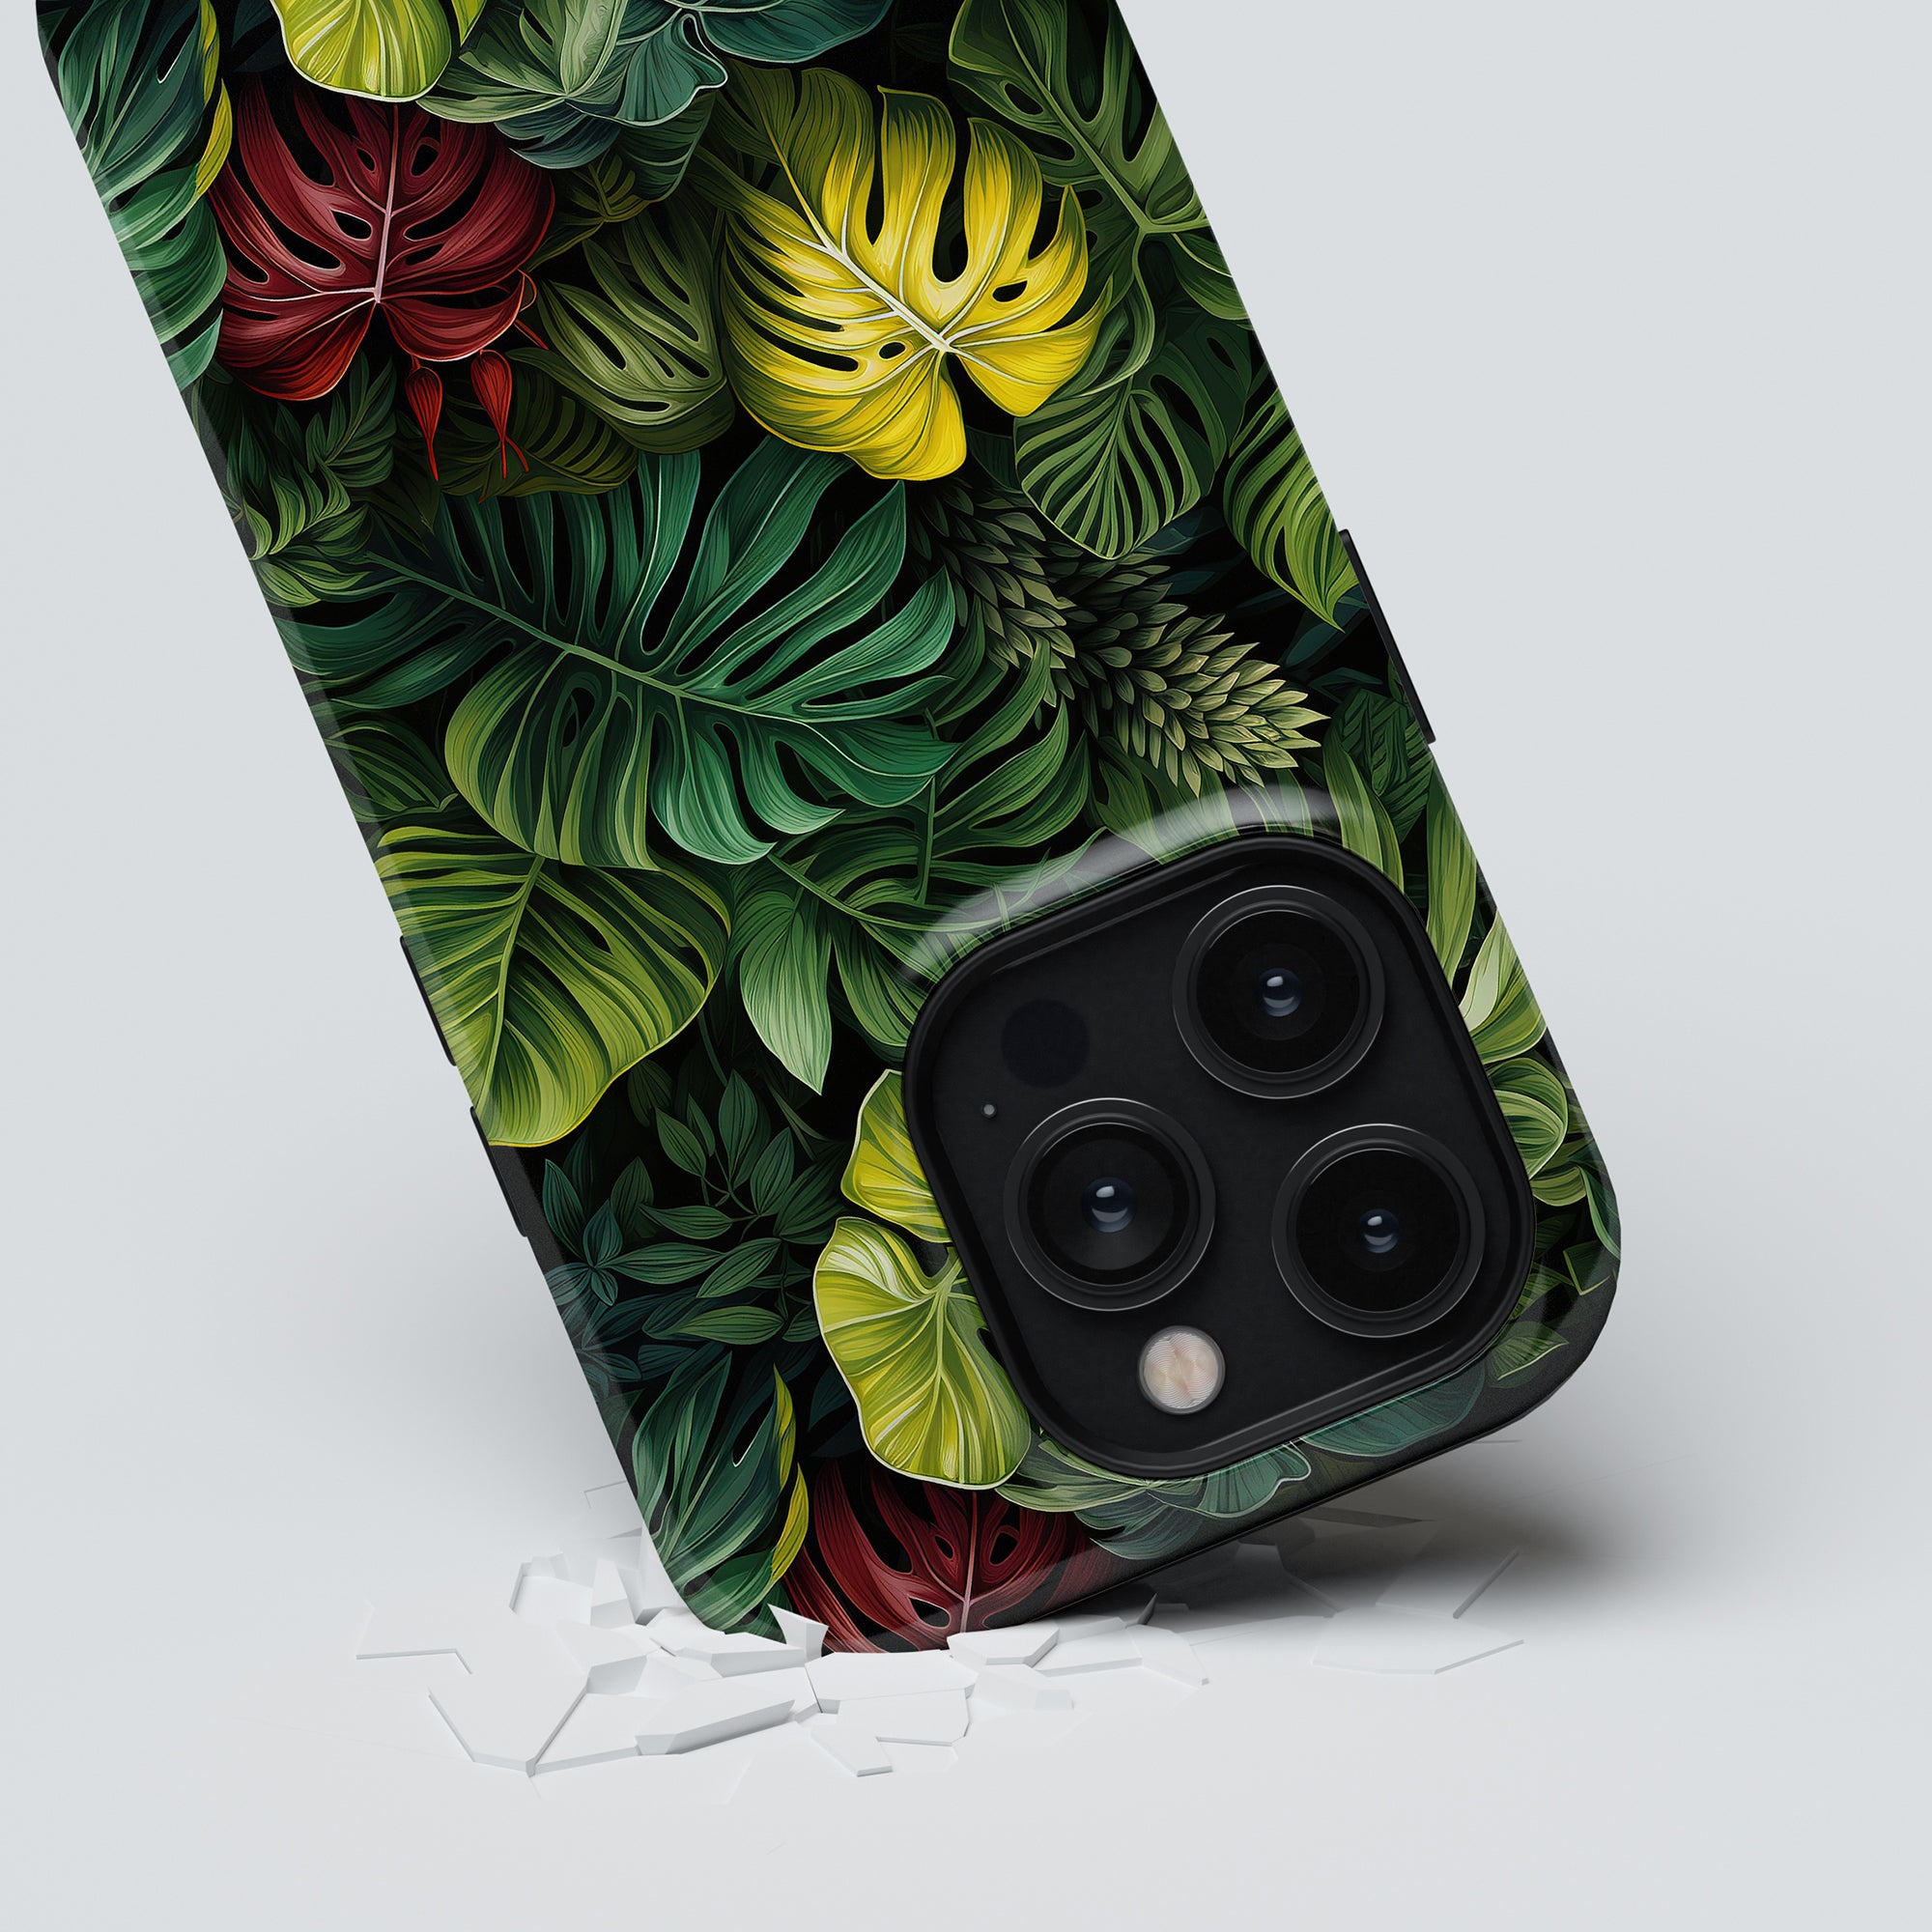 A smartphone with a Deliciosa - Tough Case from the Jungle Collection lies face down on a white surface, surrounded by pieces of a broken screen protector.